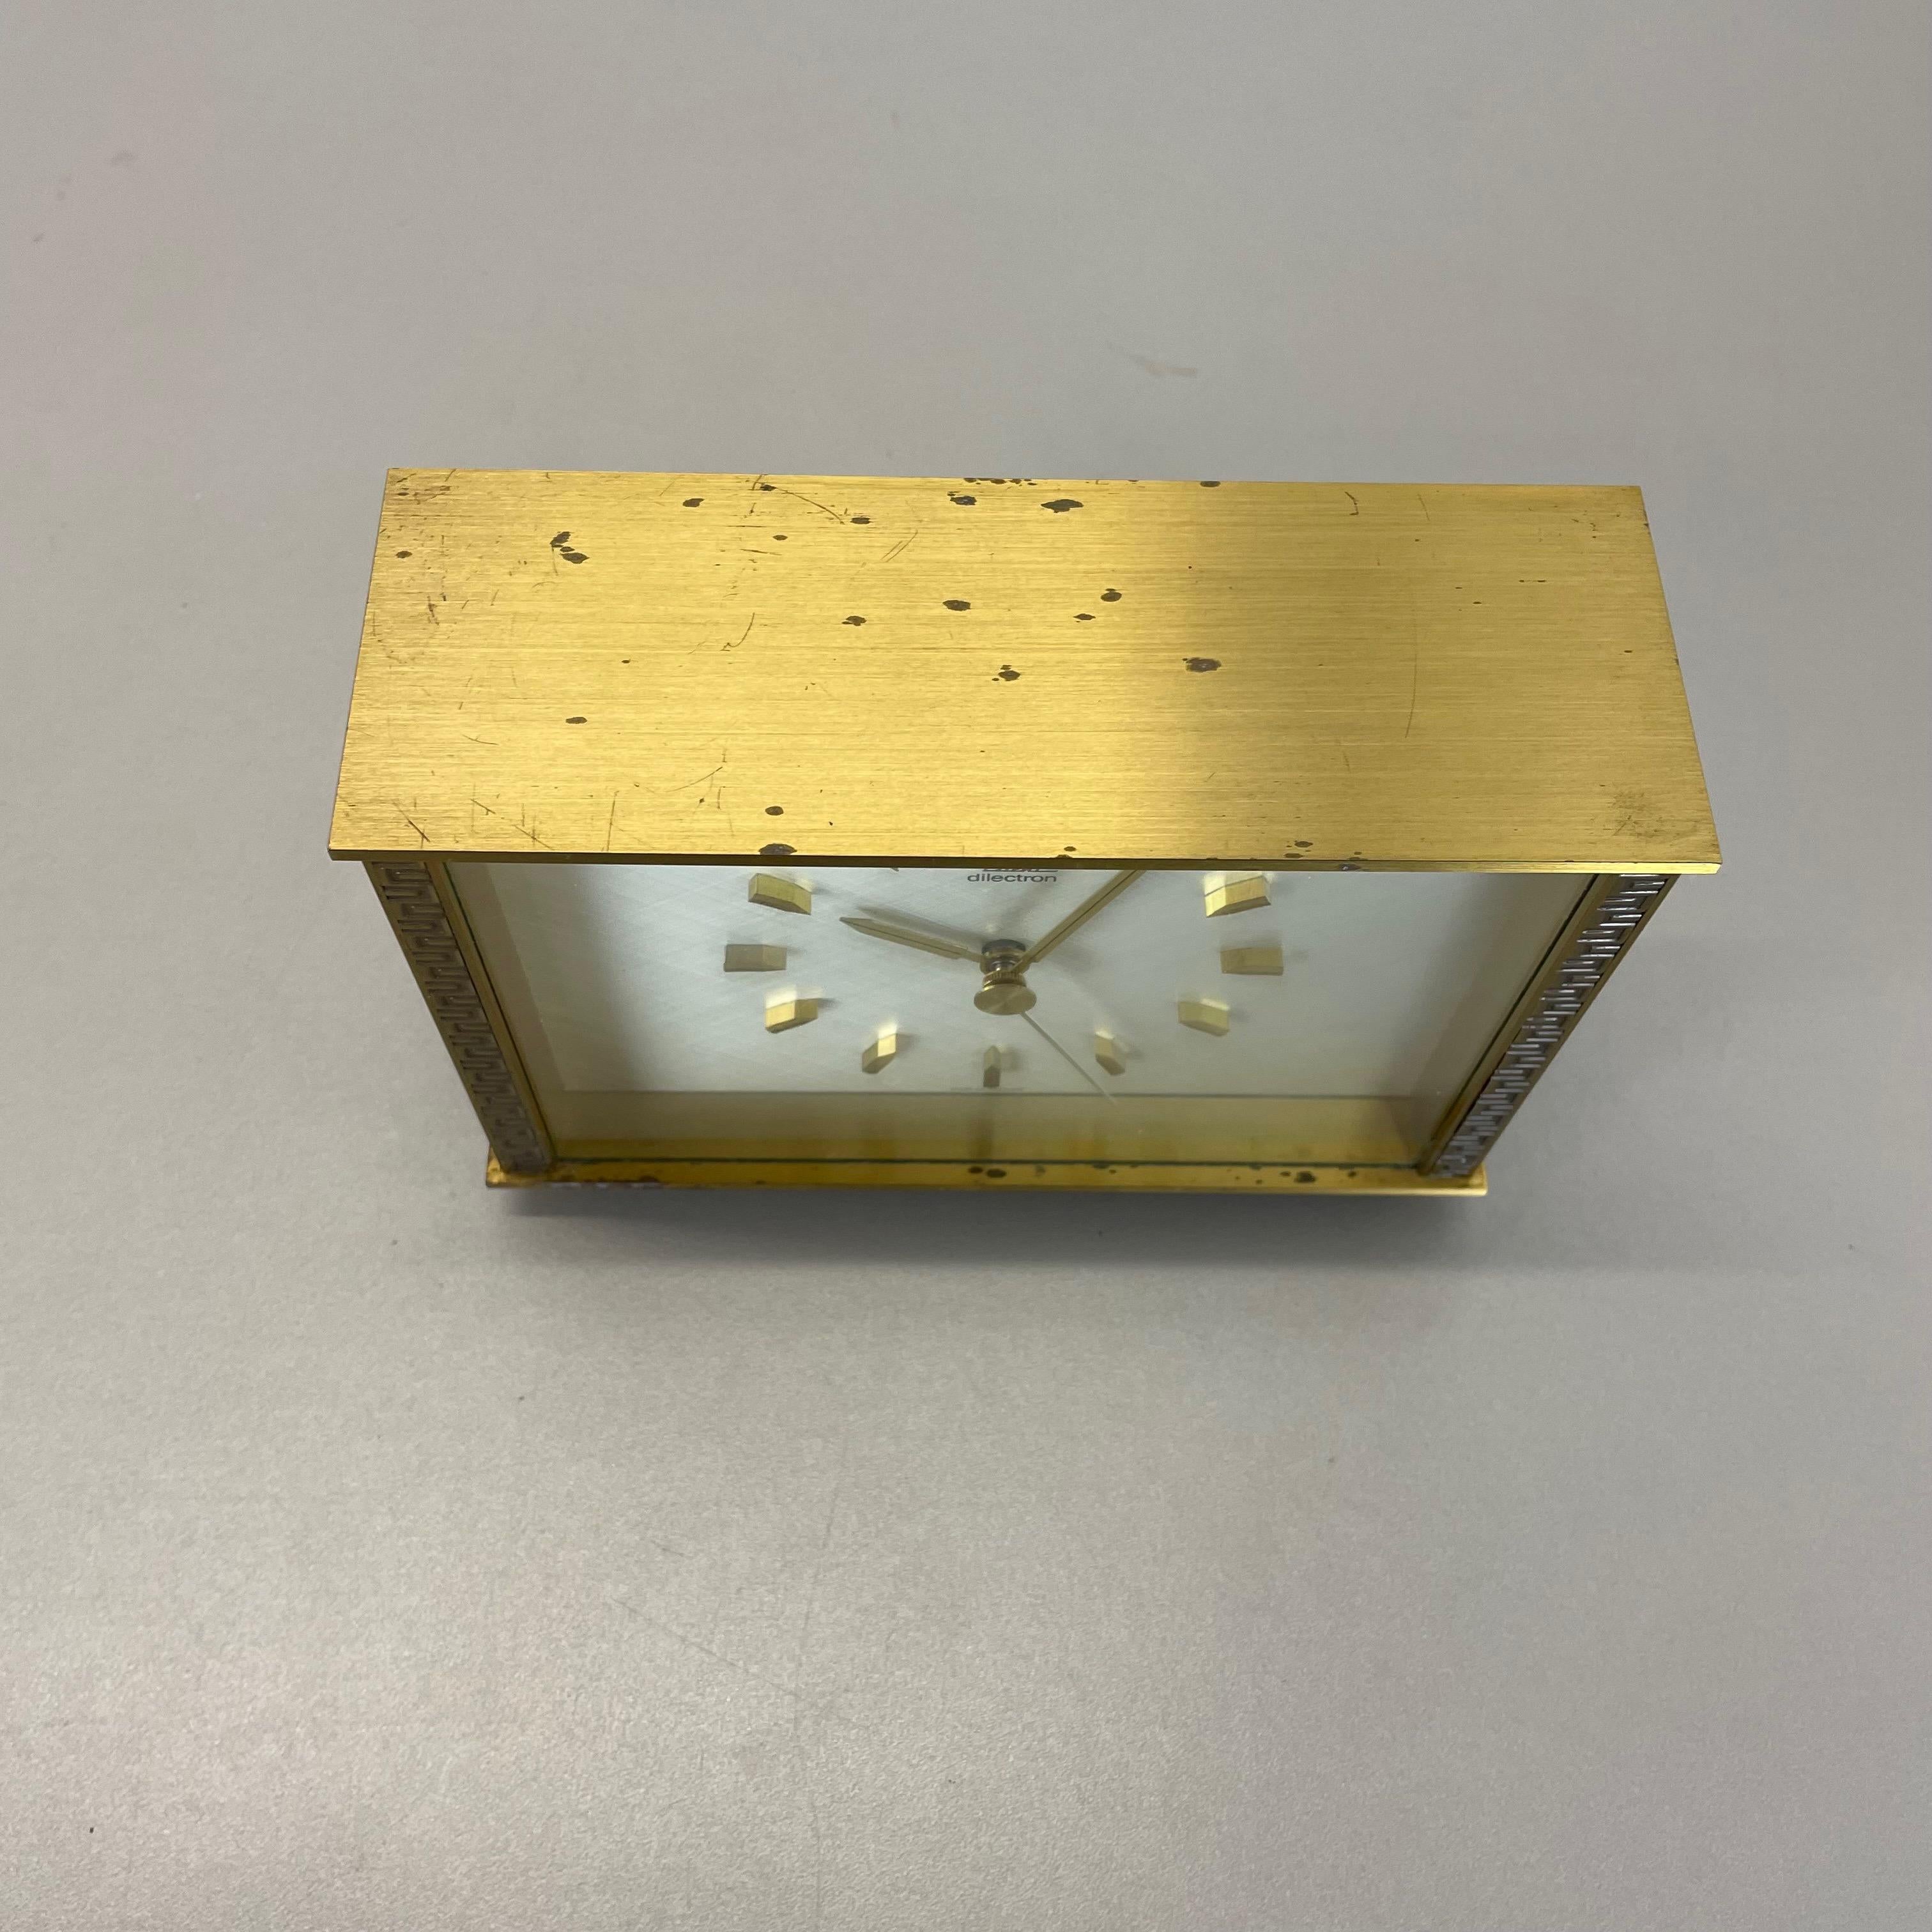 Vintage Modernist Metal Brass Table Clock by Diehl Dilectron, Germany 1960s In Good Condition For Sale In Kirchlengern, DE